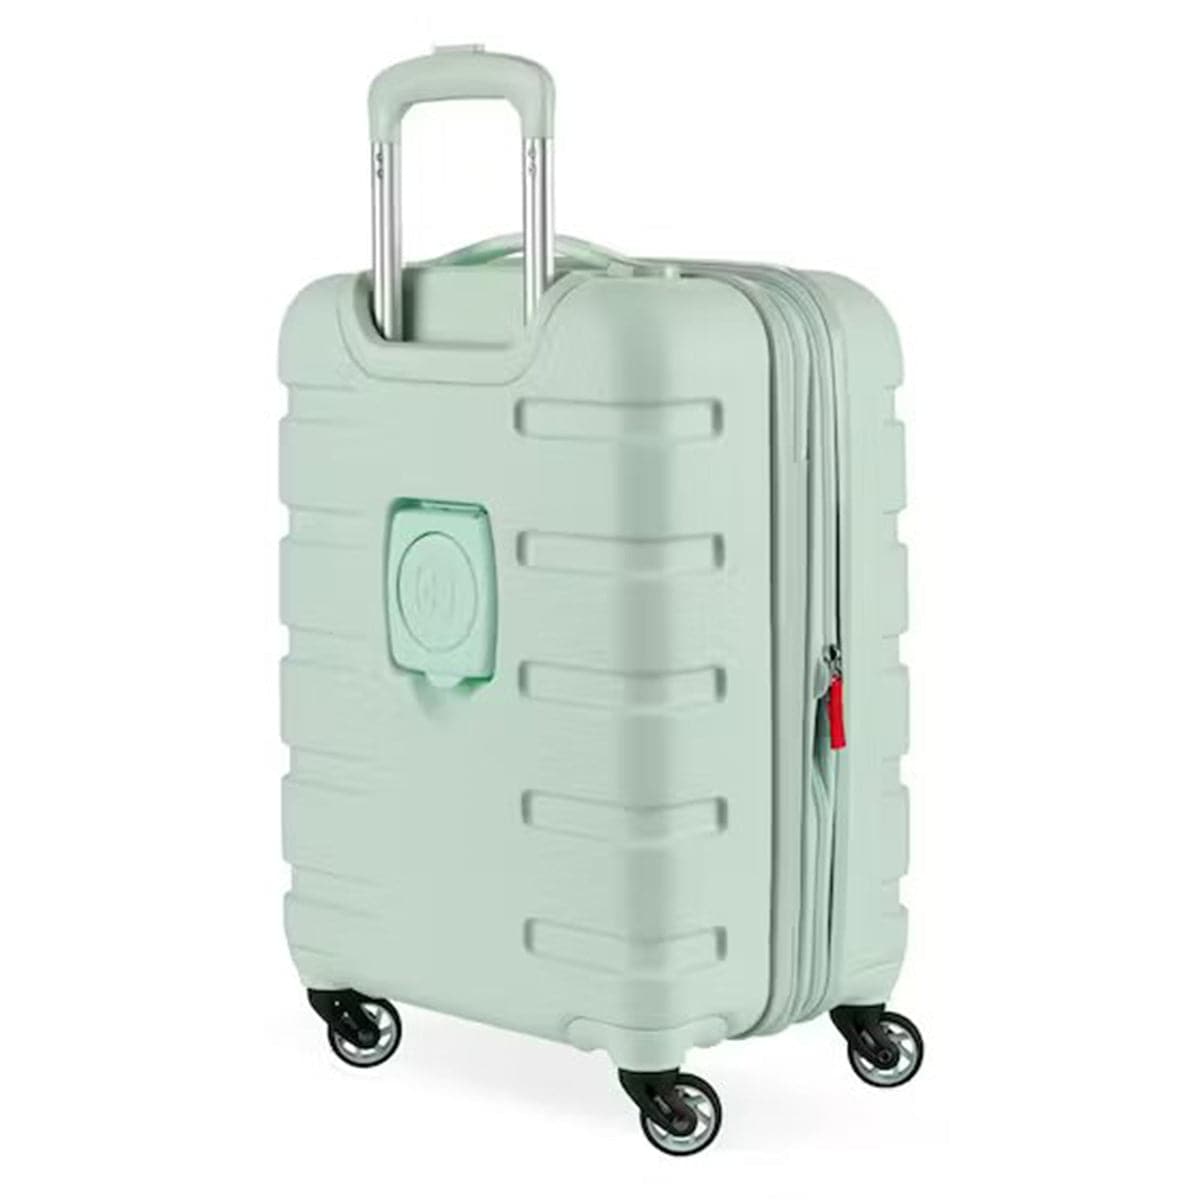 SwissGear 7366 18" Expandable Carry On Hardside Spinner Luggage